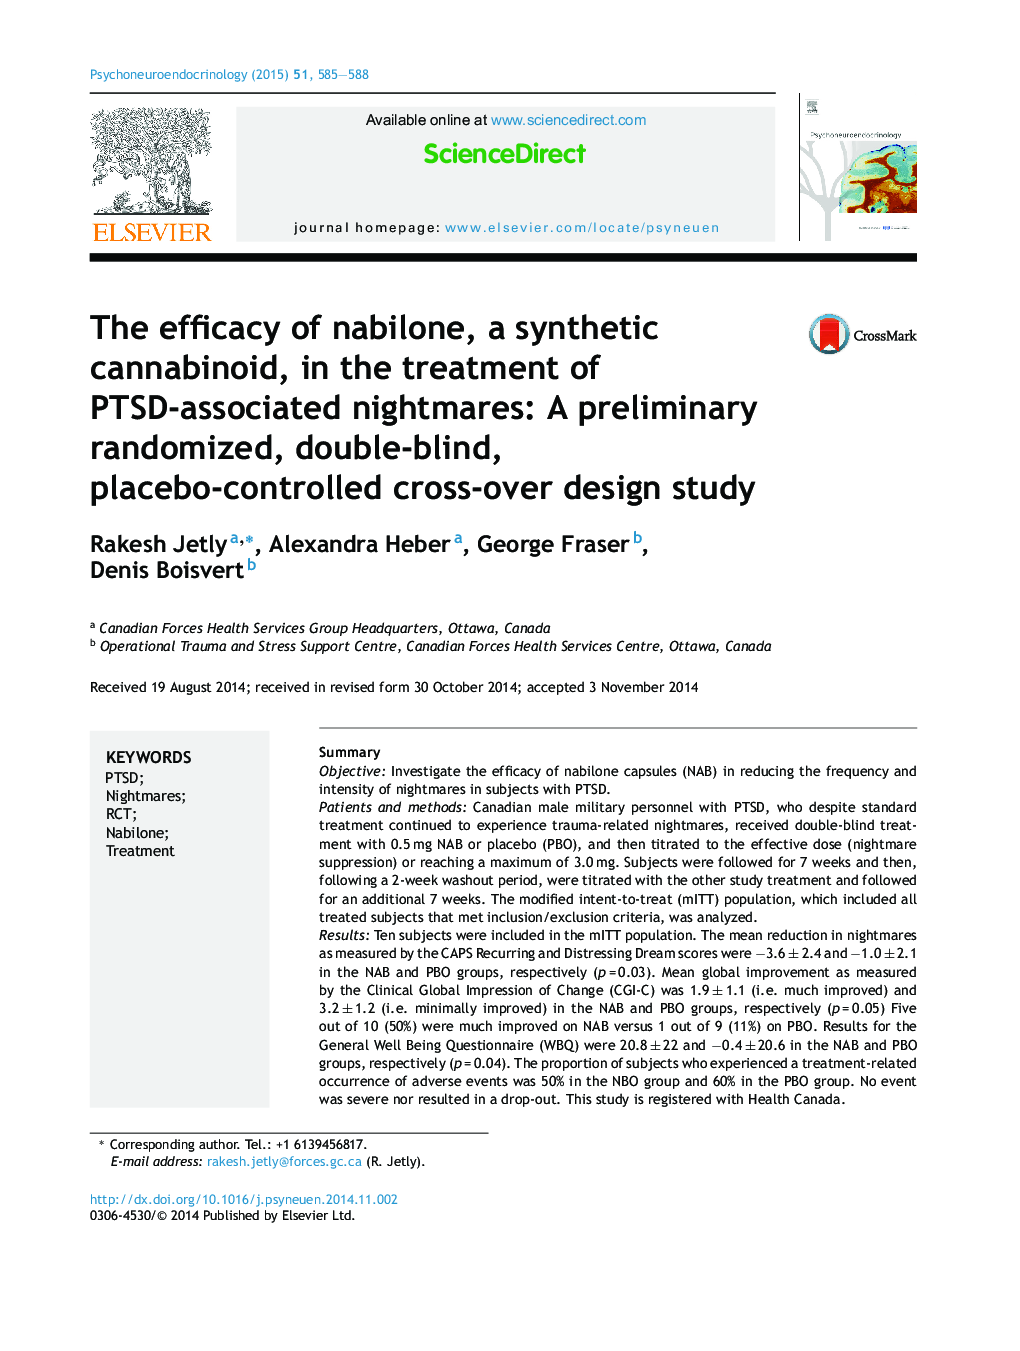 The efficacy of nabilone, a synthetic cannabinoid, in the treatment of PTSD-associated nightmares: A preliminary randomized, double-blind, placebo-controlled cross-over design study